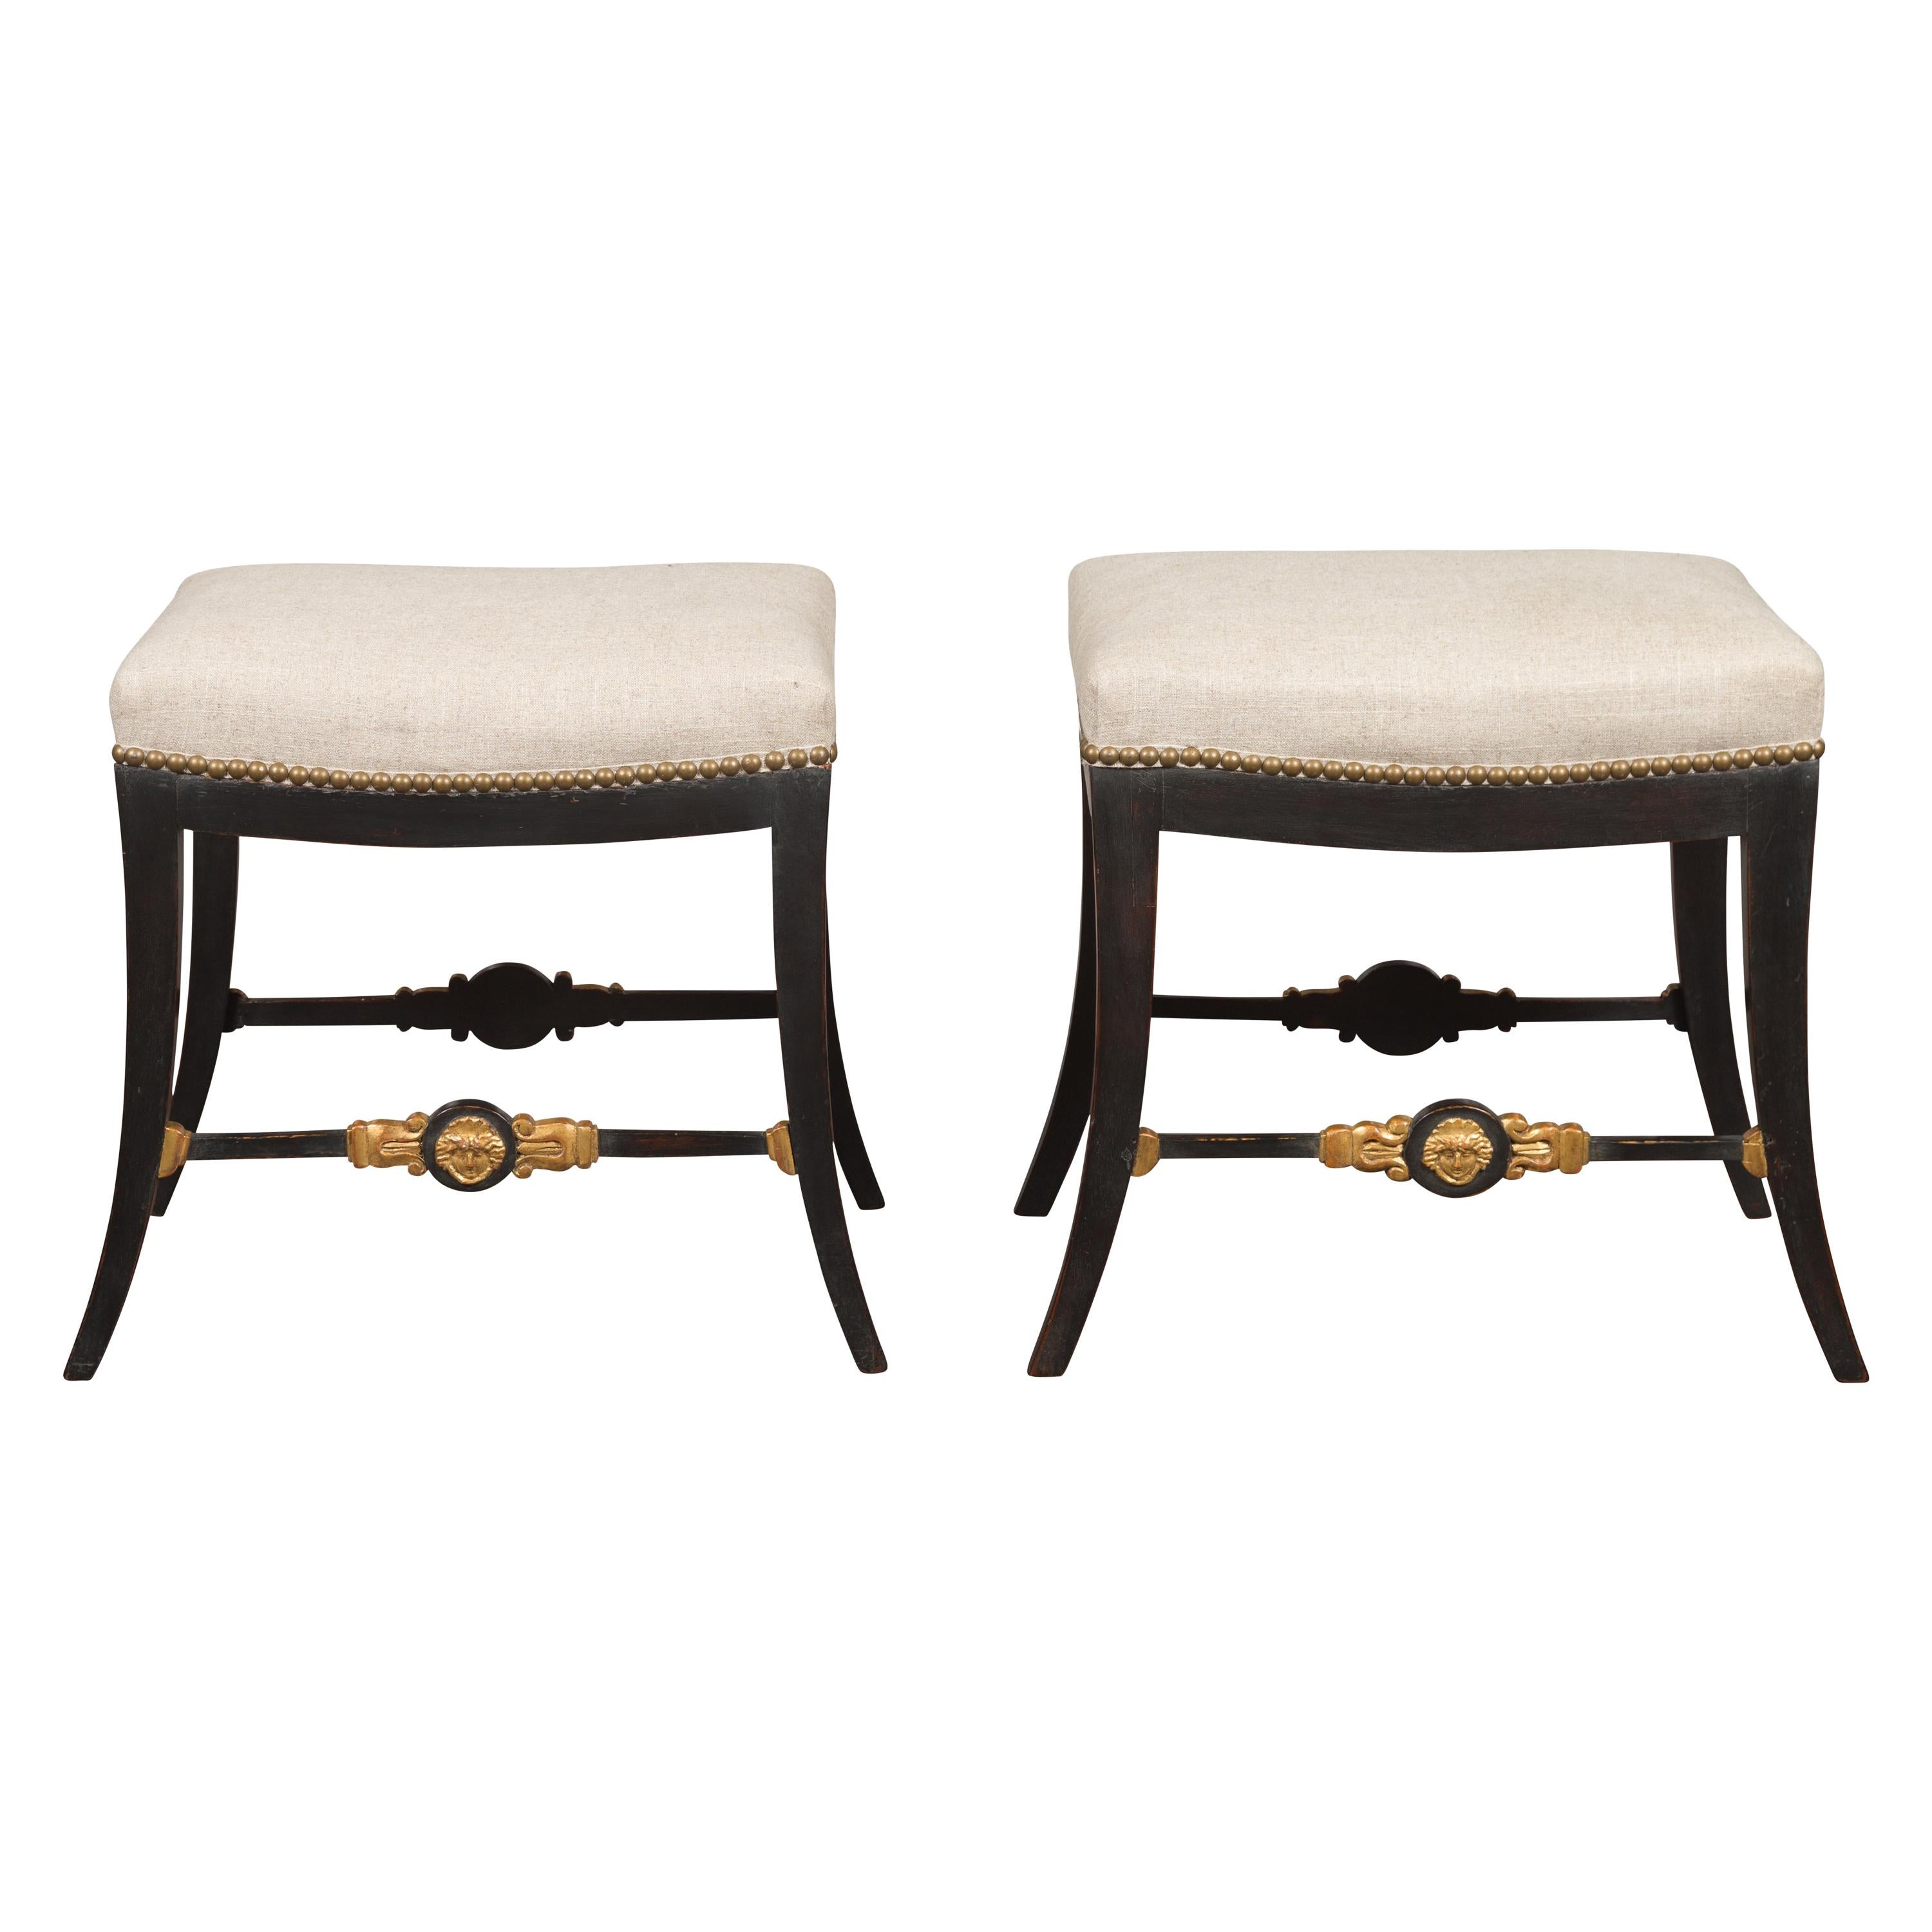 Pair of English Regency 1820s Ebonized and Gilt Stools with New Upholstery